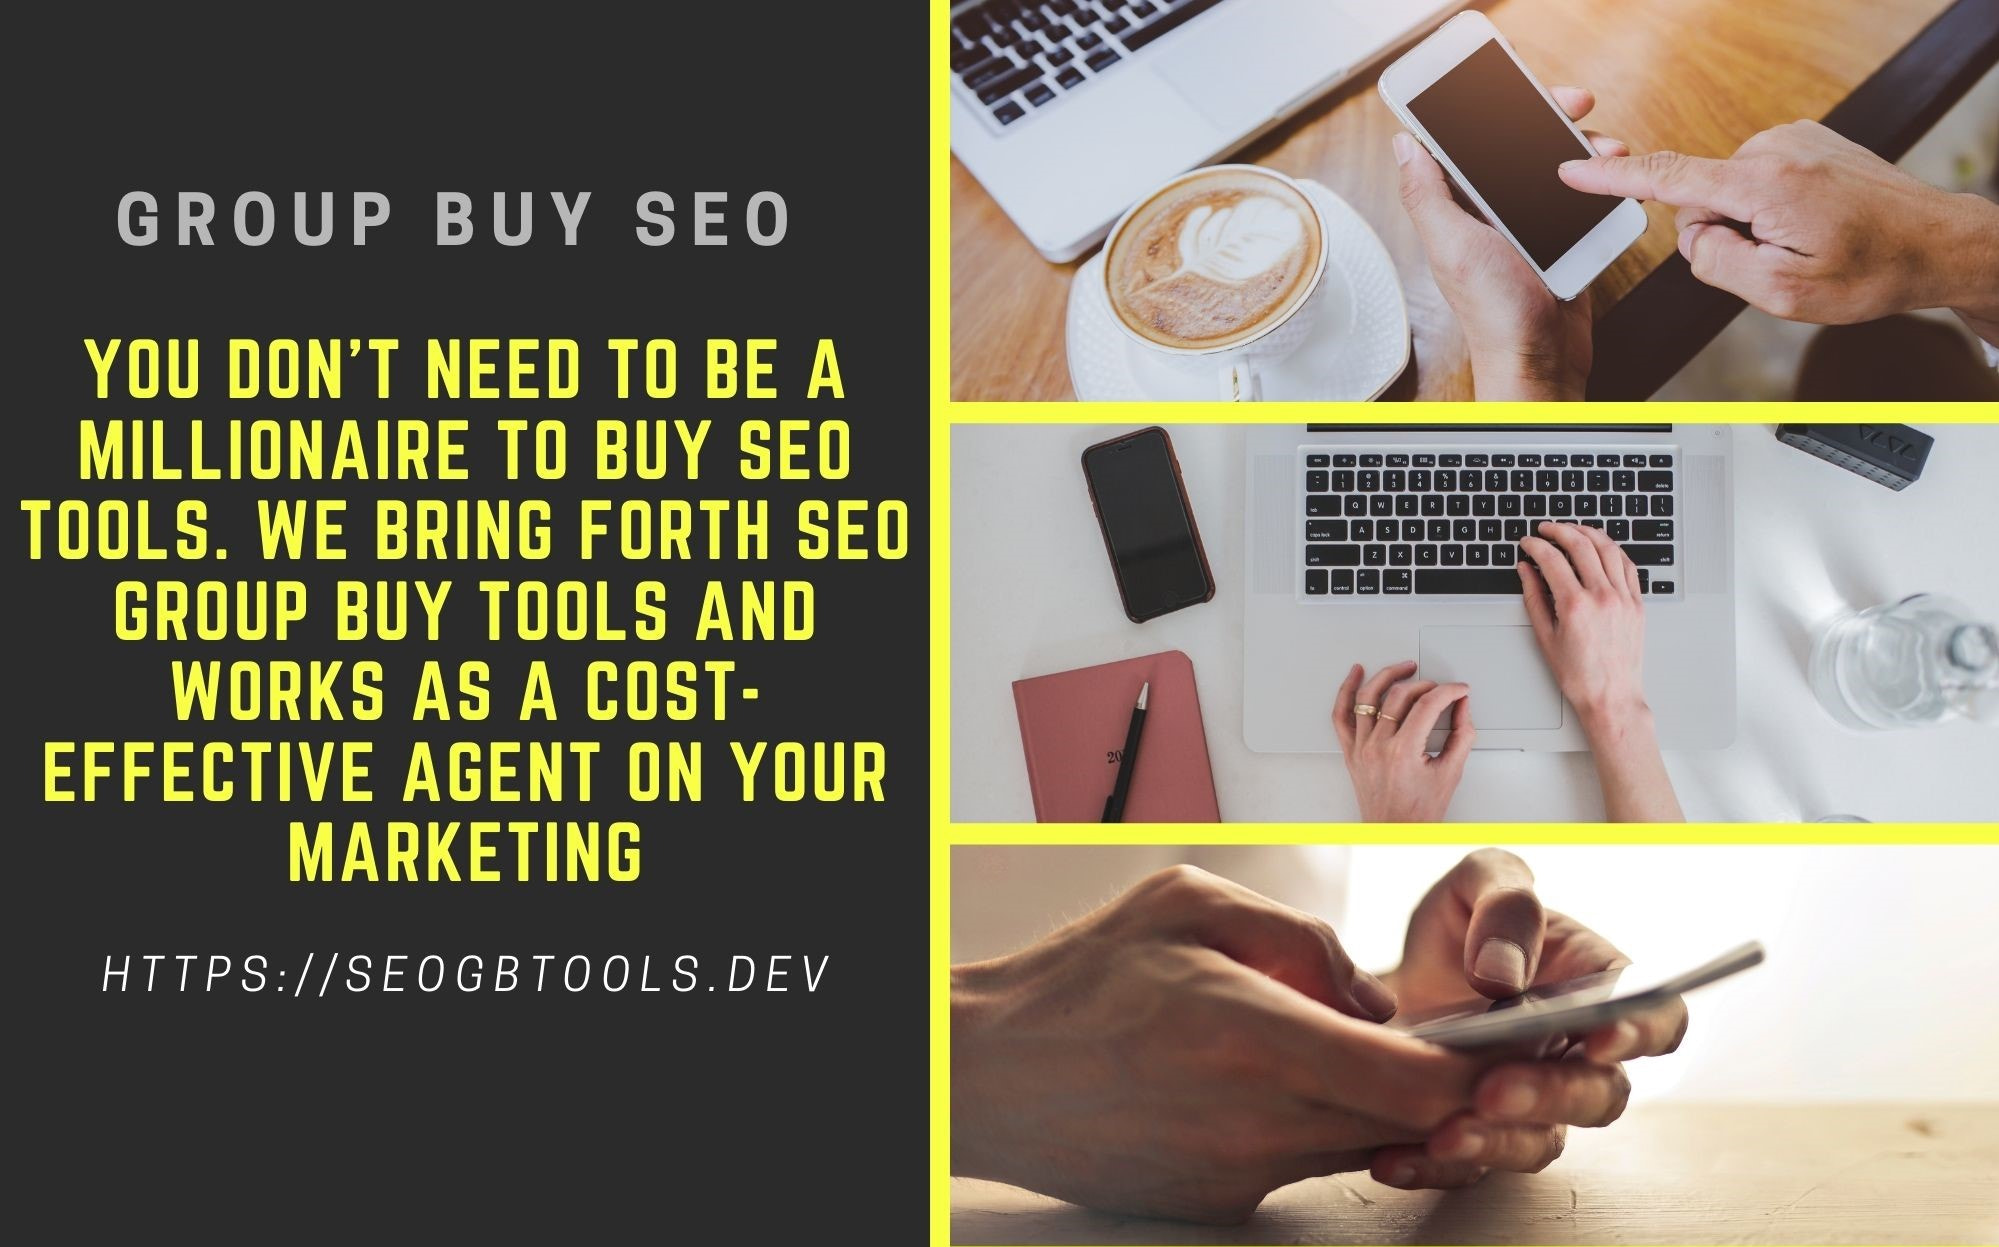 Best SEO Tools: Find and Buy Affordable and Premium SEO TOOLS